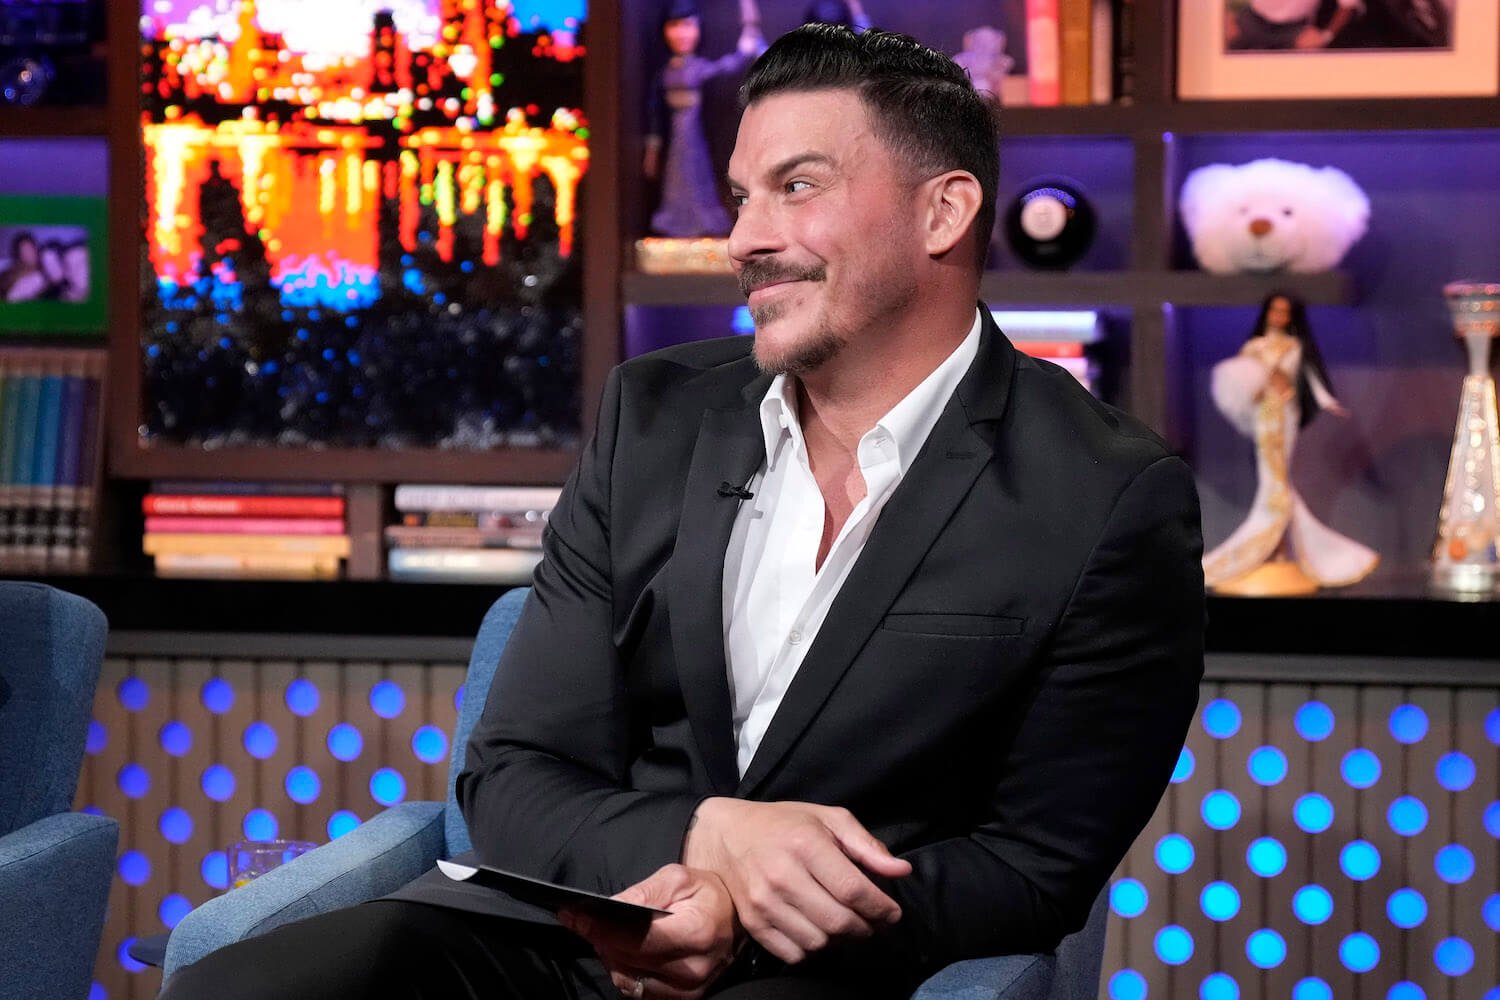 Former 'Vanderpump Rules' star Jax Taylor talked about Tom Sandoval during 'Watch What Happens Live.' Jax is seen here wearing a white button down and black jacket on the set of 'Watch What Happens Live.'